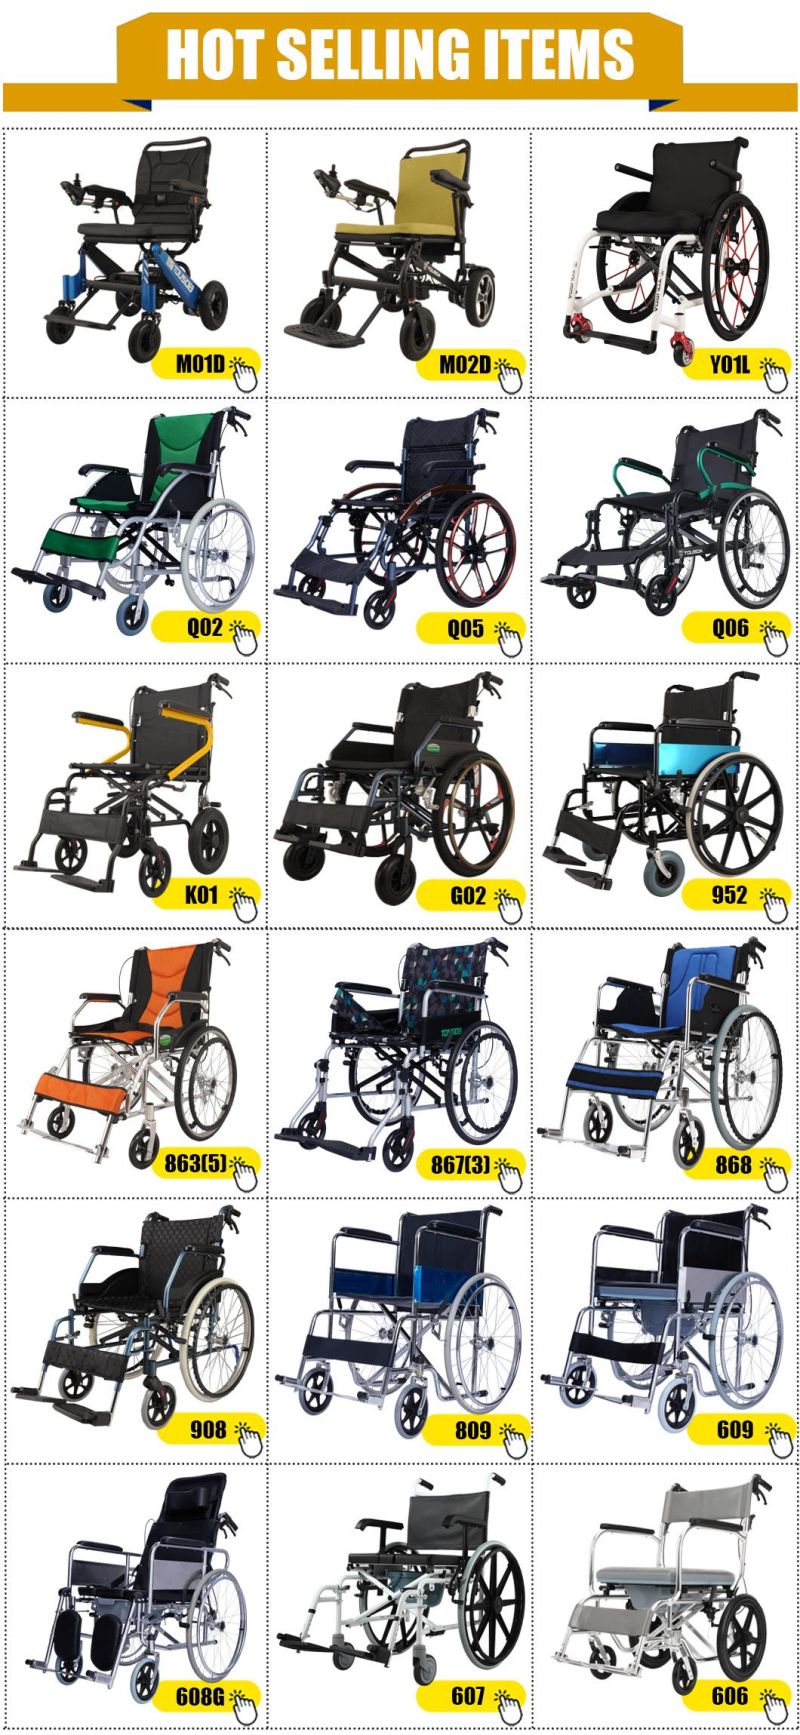 Silla De Ruedas Scooter Price Medical Aluminum Toilet Shower Commode Sport Folding Manual Power Lightweight Folding Power Latest Wheel Chair for Disabled People